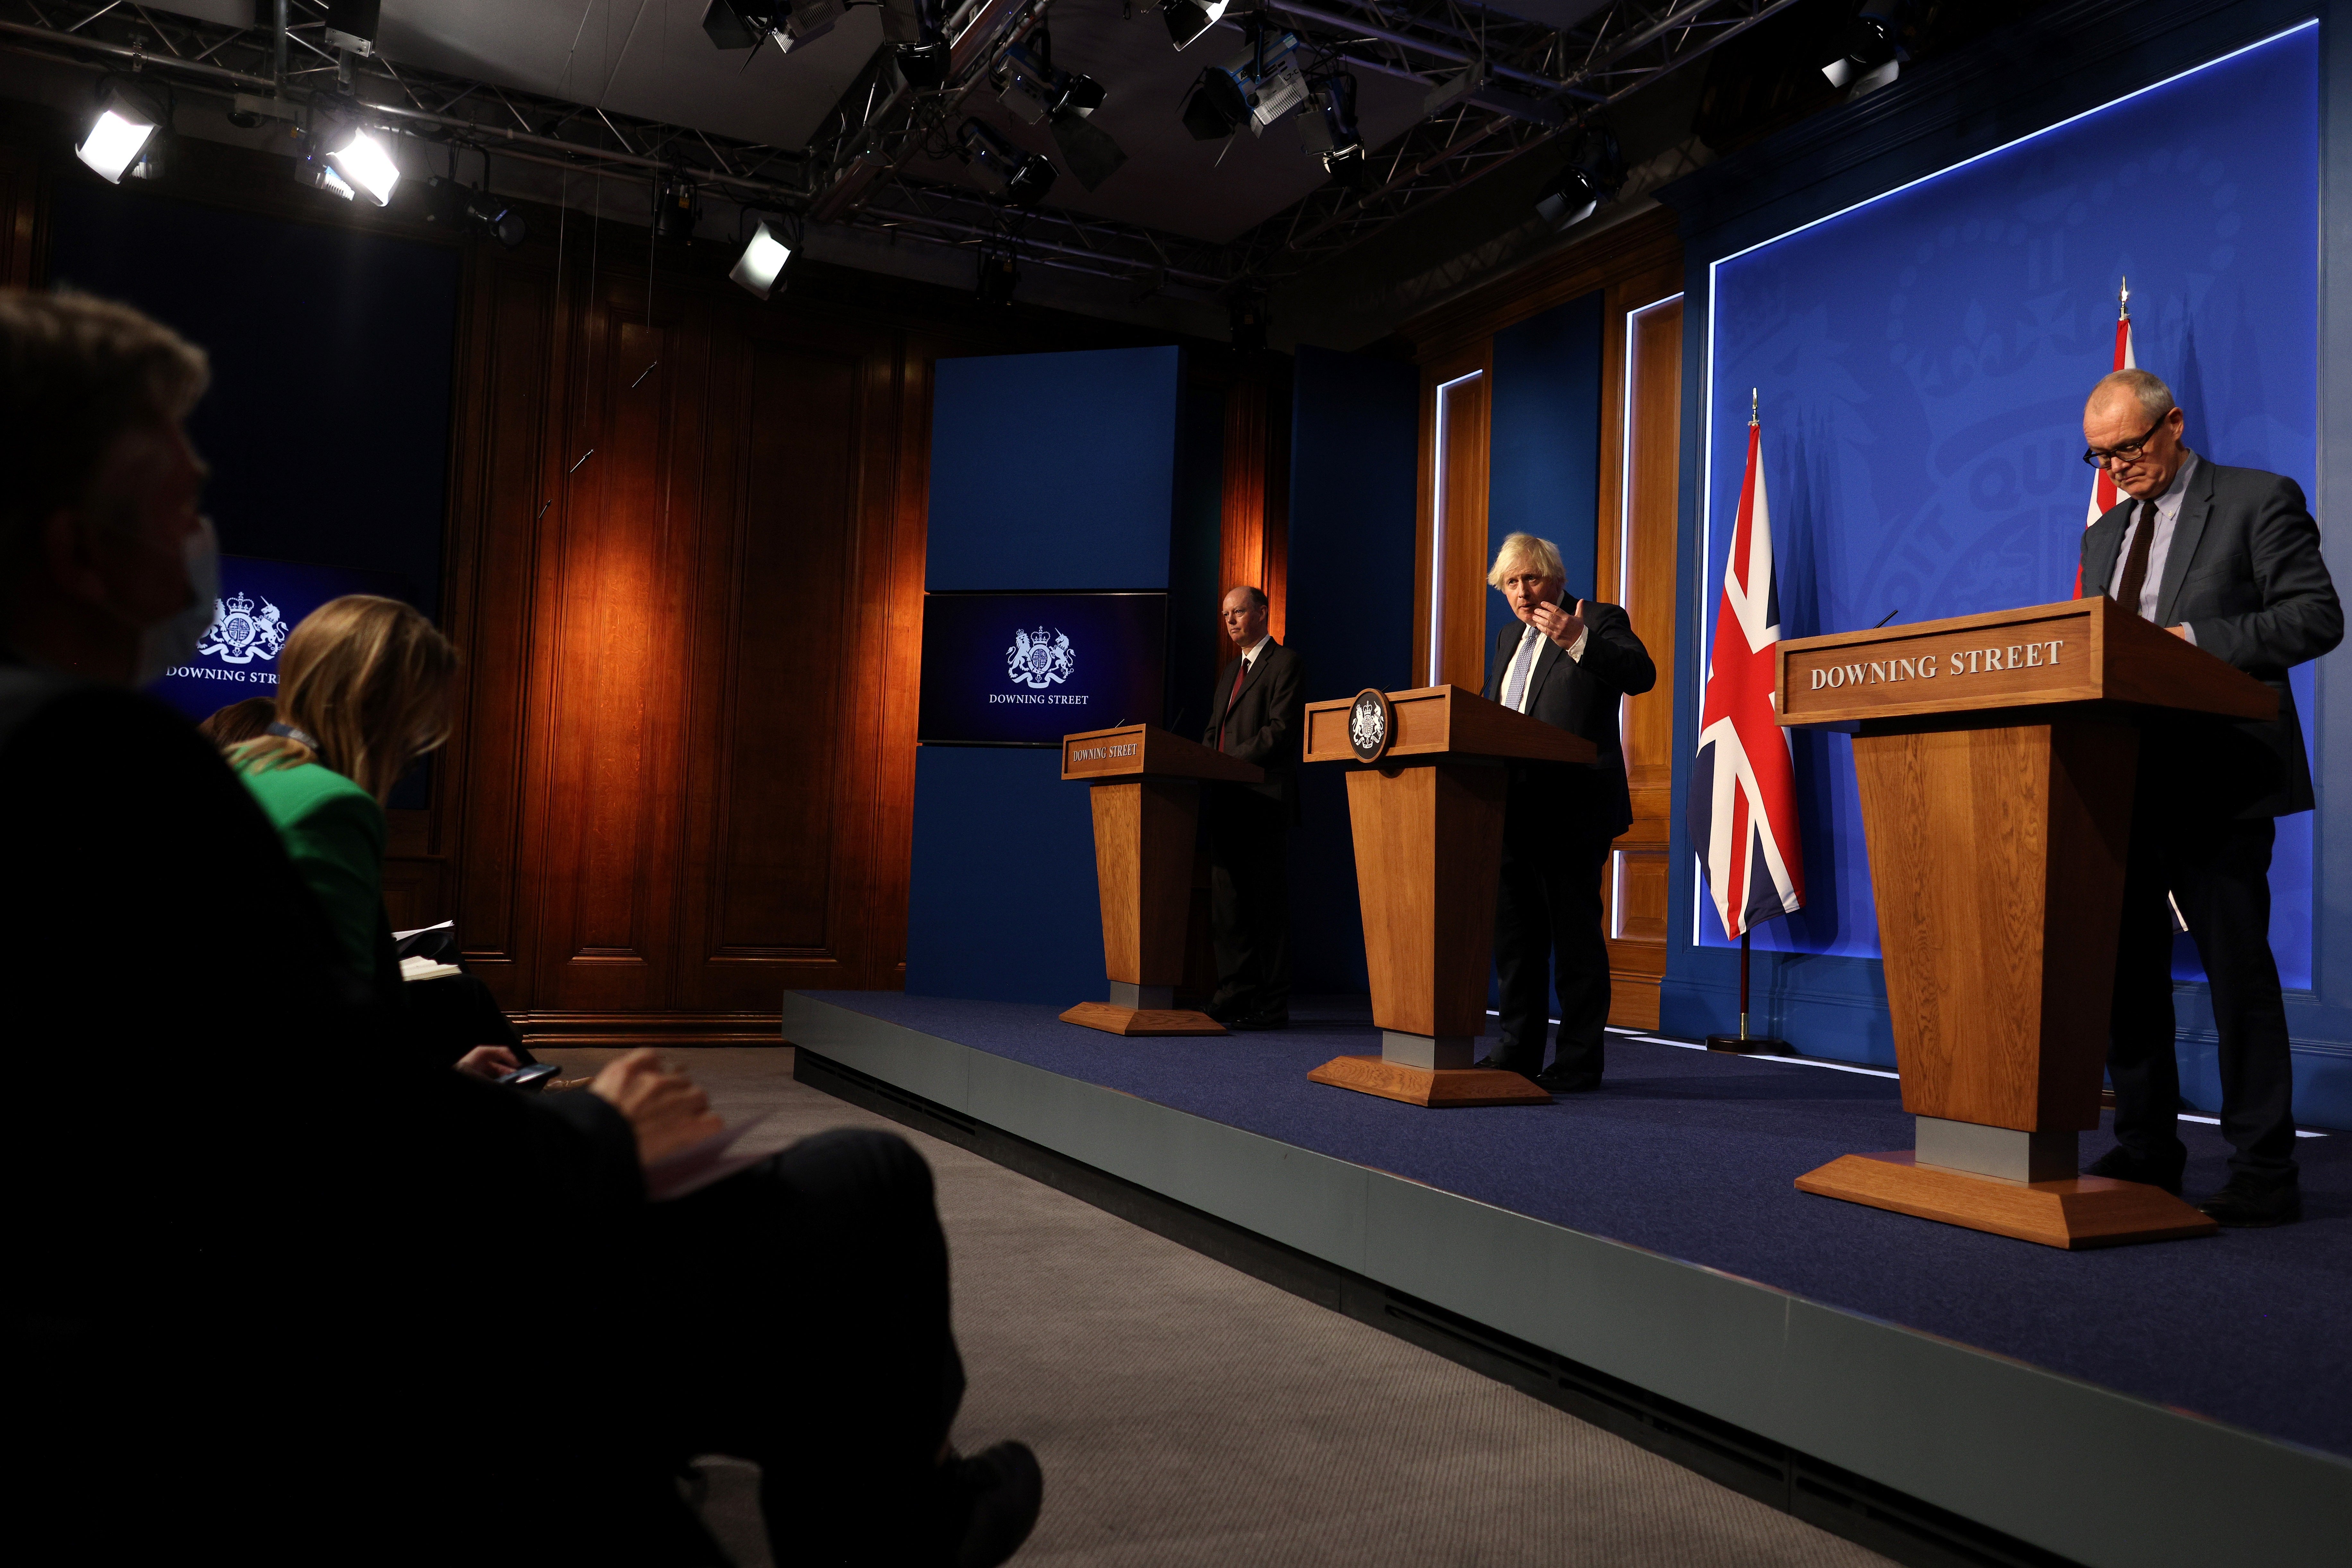 Chris Whitty, Boris Johnson and Patrick Vallance hold a press conference (Adrian Dennis/PA)